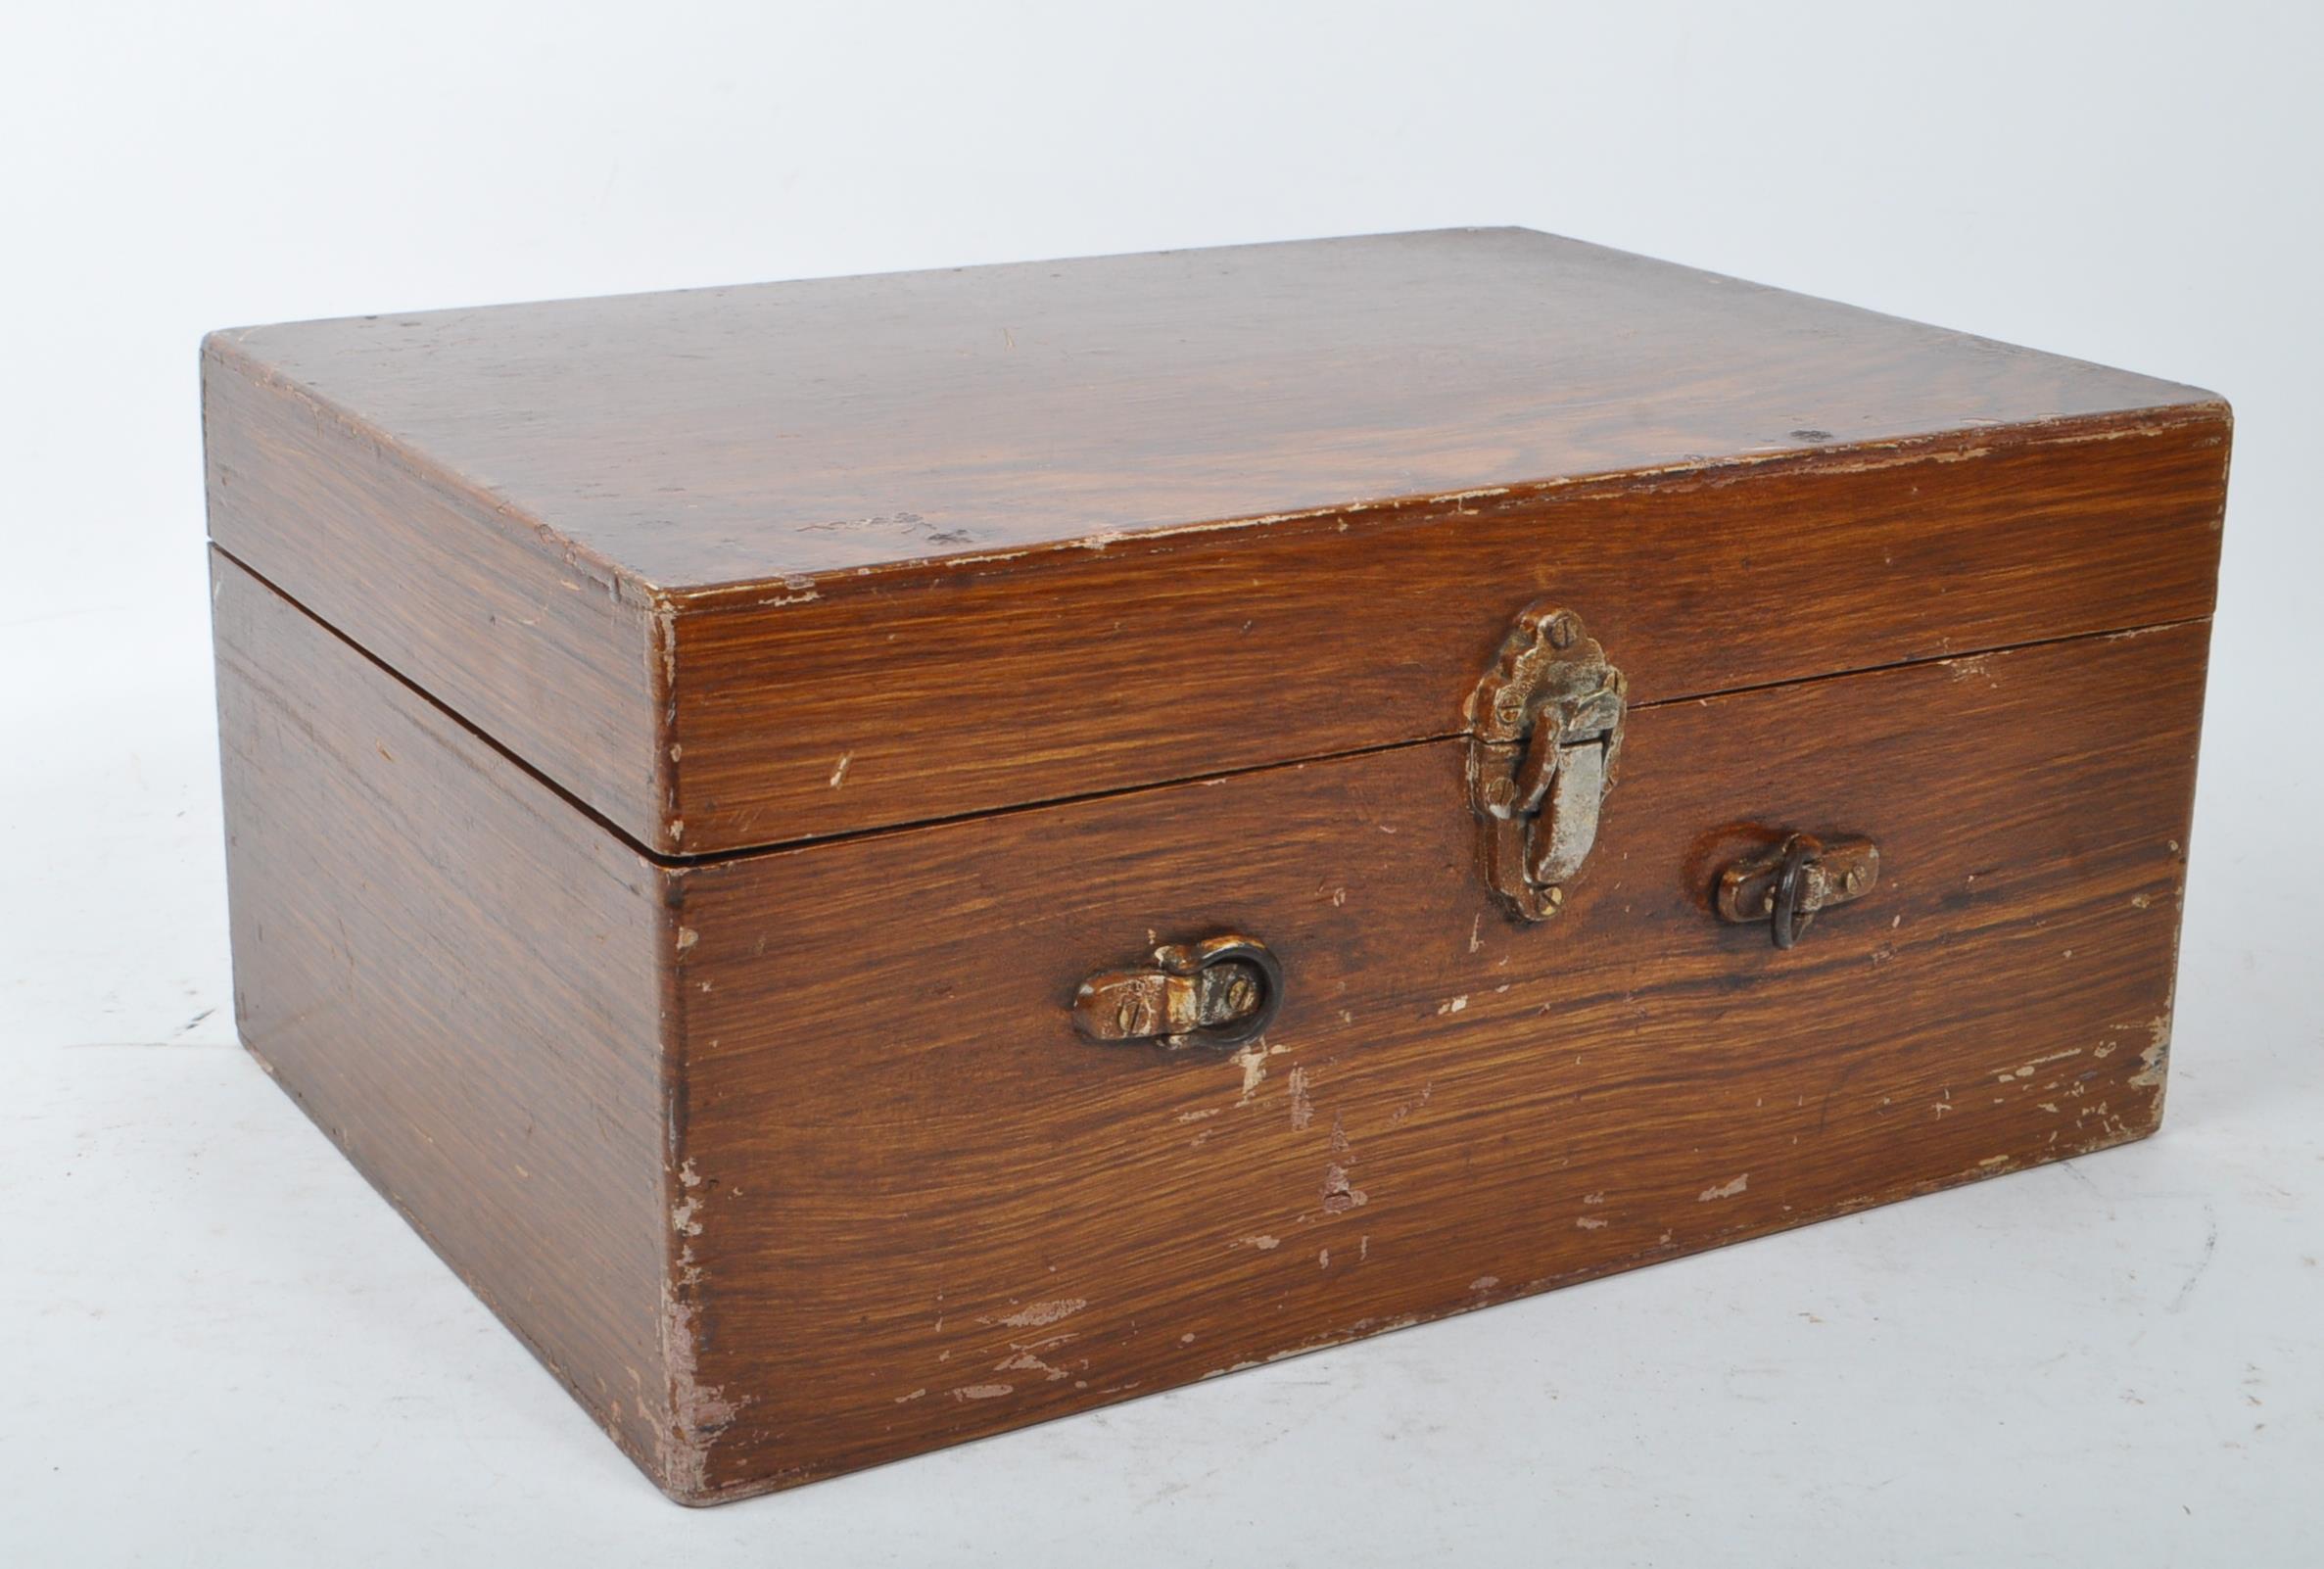 EARLY 20TH CENTURY EAST SOMERSET DISTRICT COUNCIL CHEST - Image 5 of 6